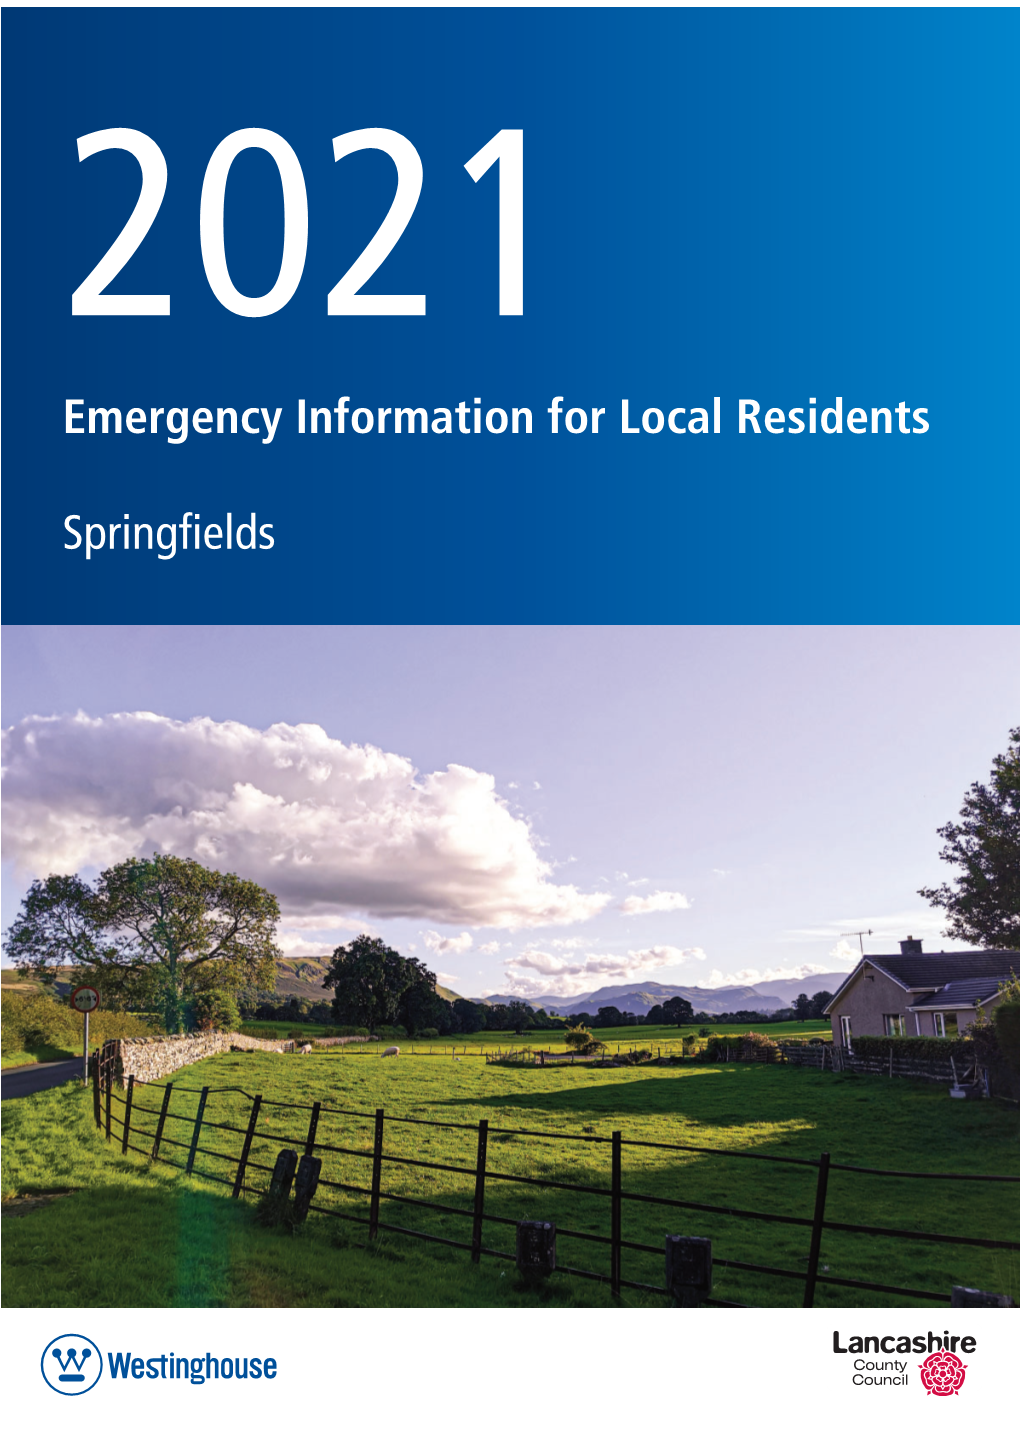 Emergency Information for Local Residents Springfields